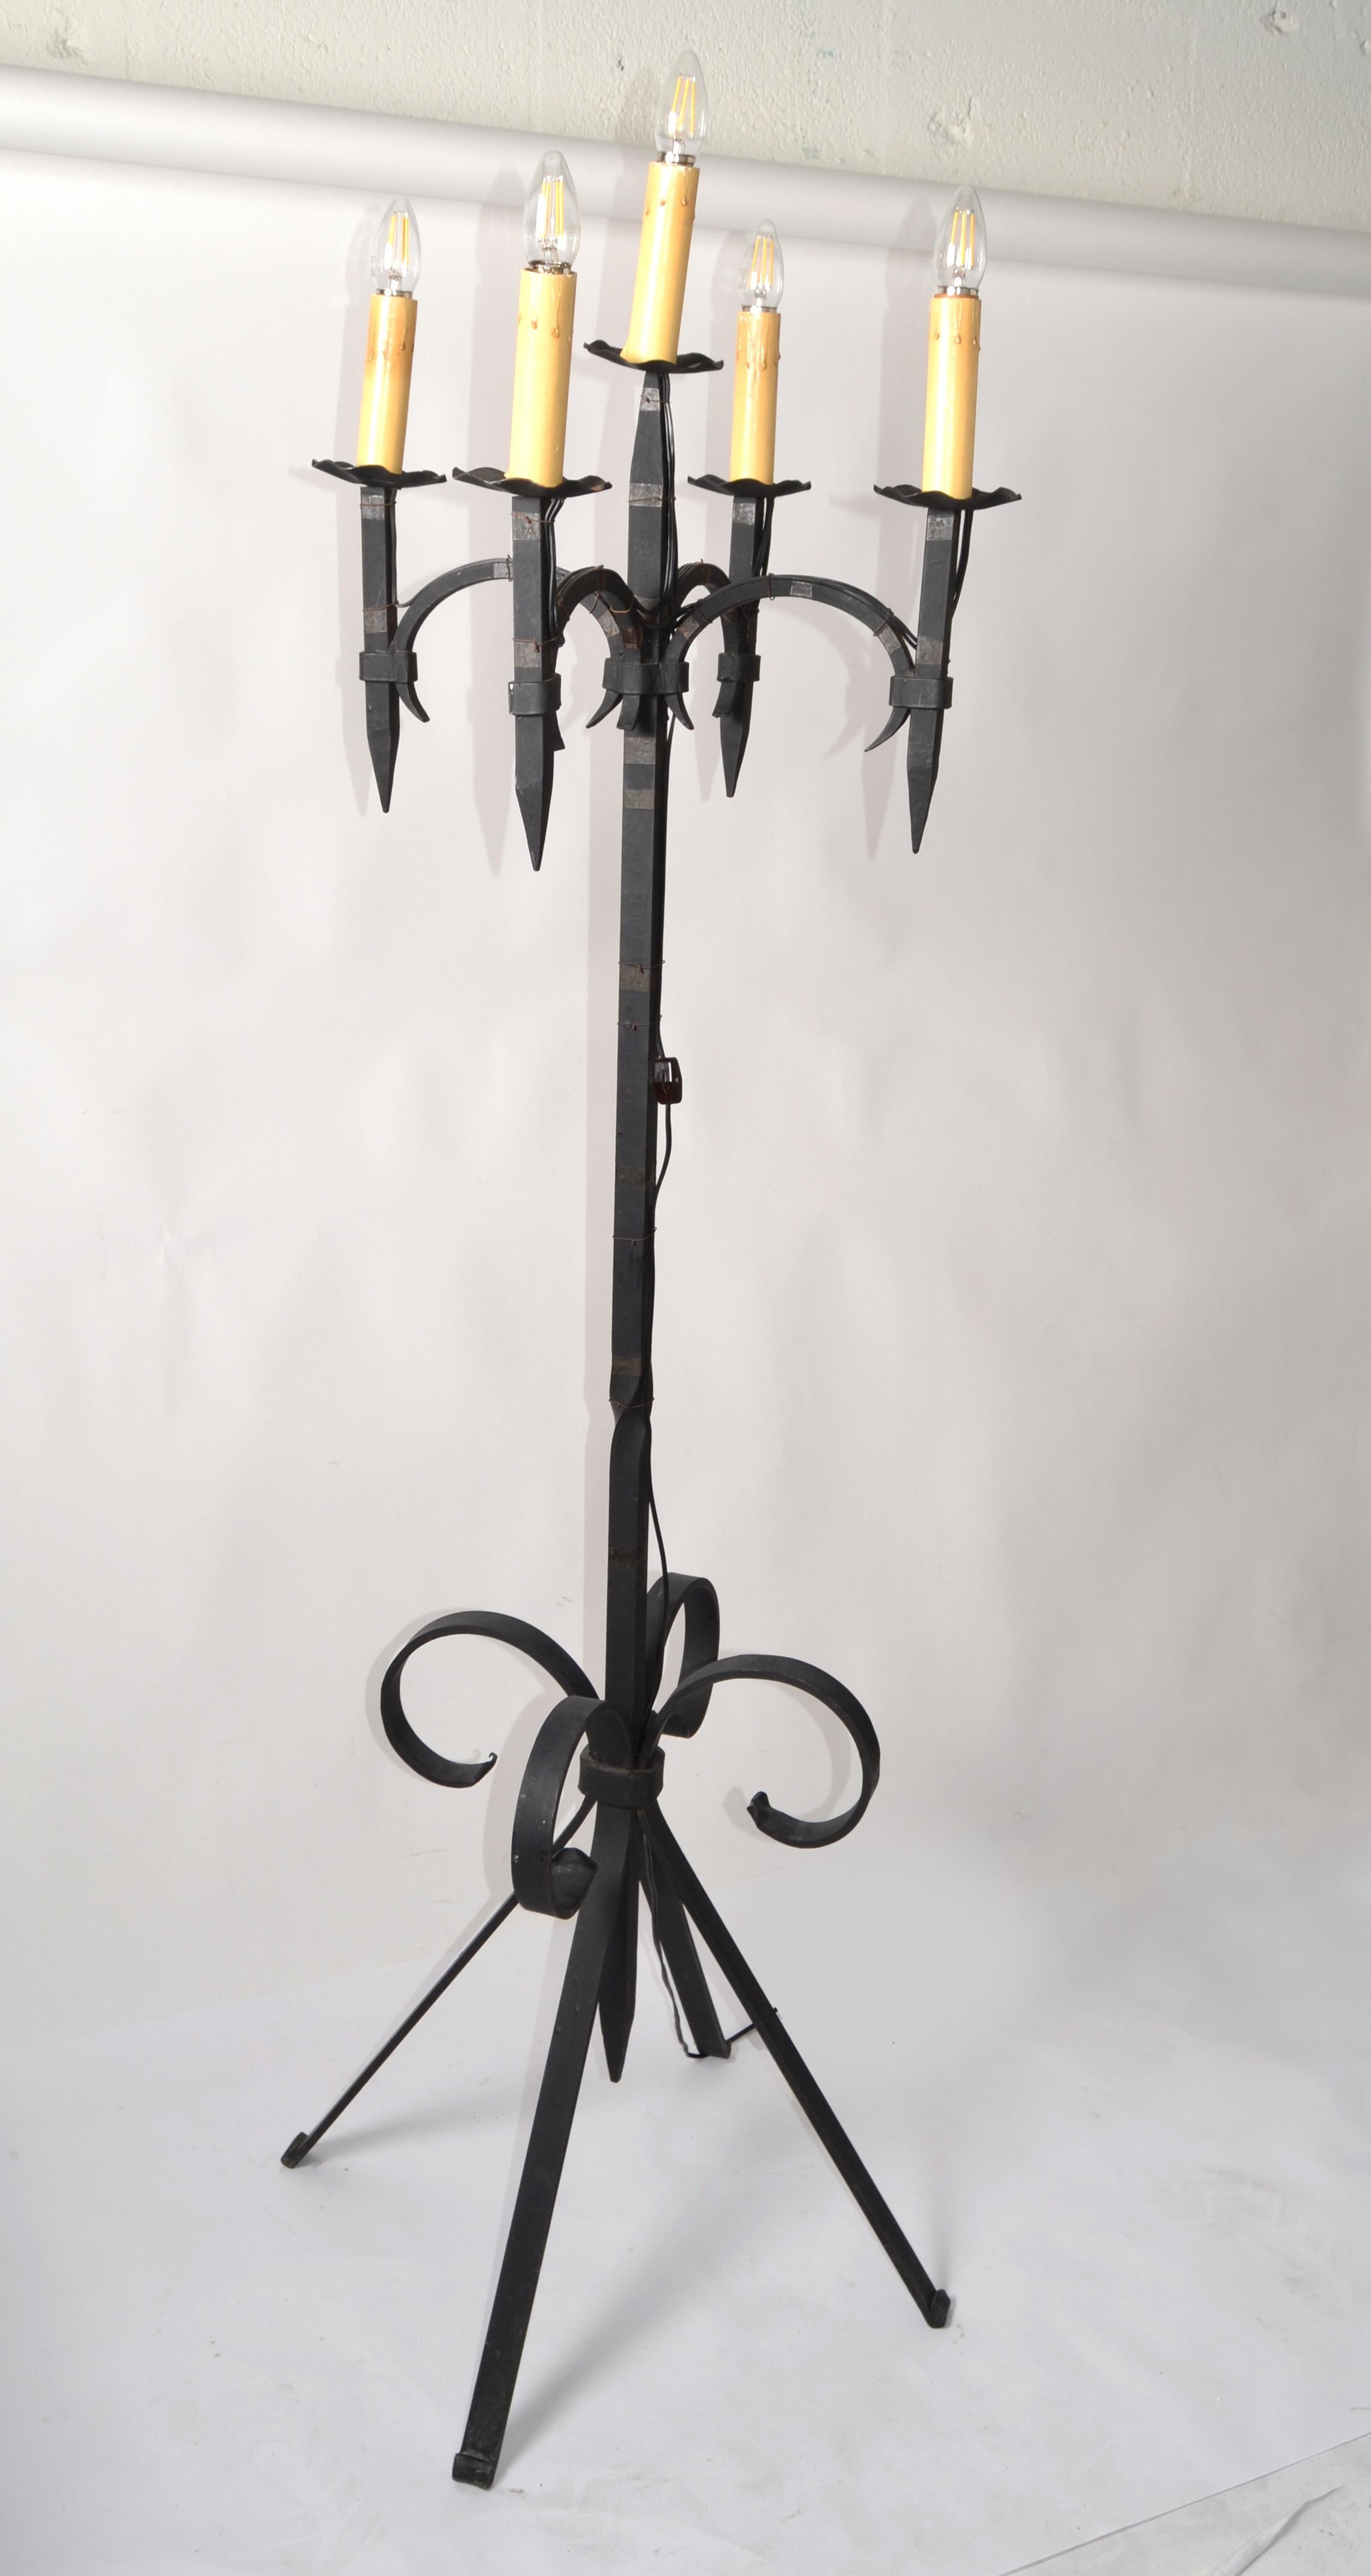 Gothic Early 20th Century French Forged Wrought Iron 5 Light Candelabra Floor Lamp For Sale